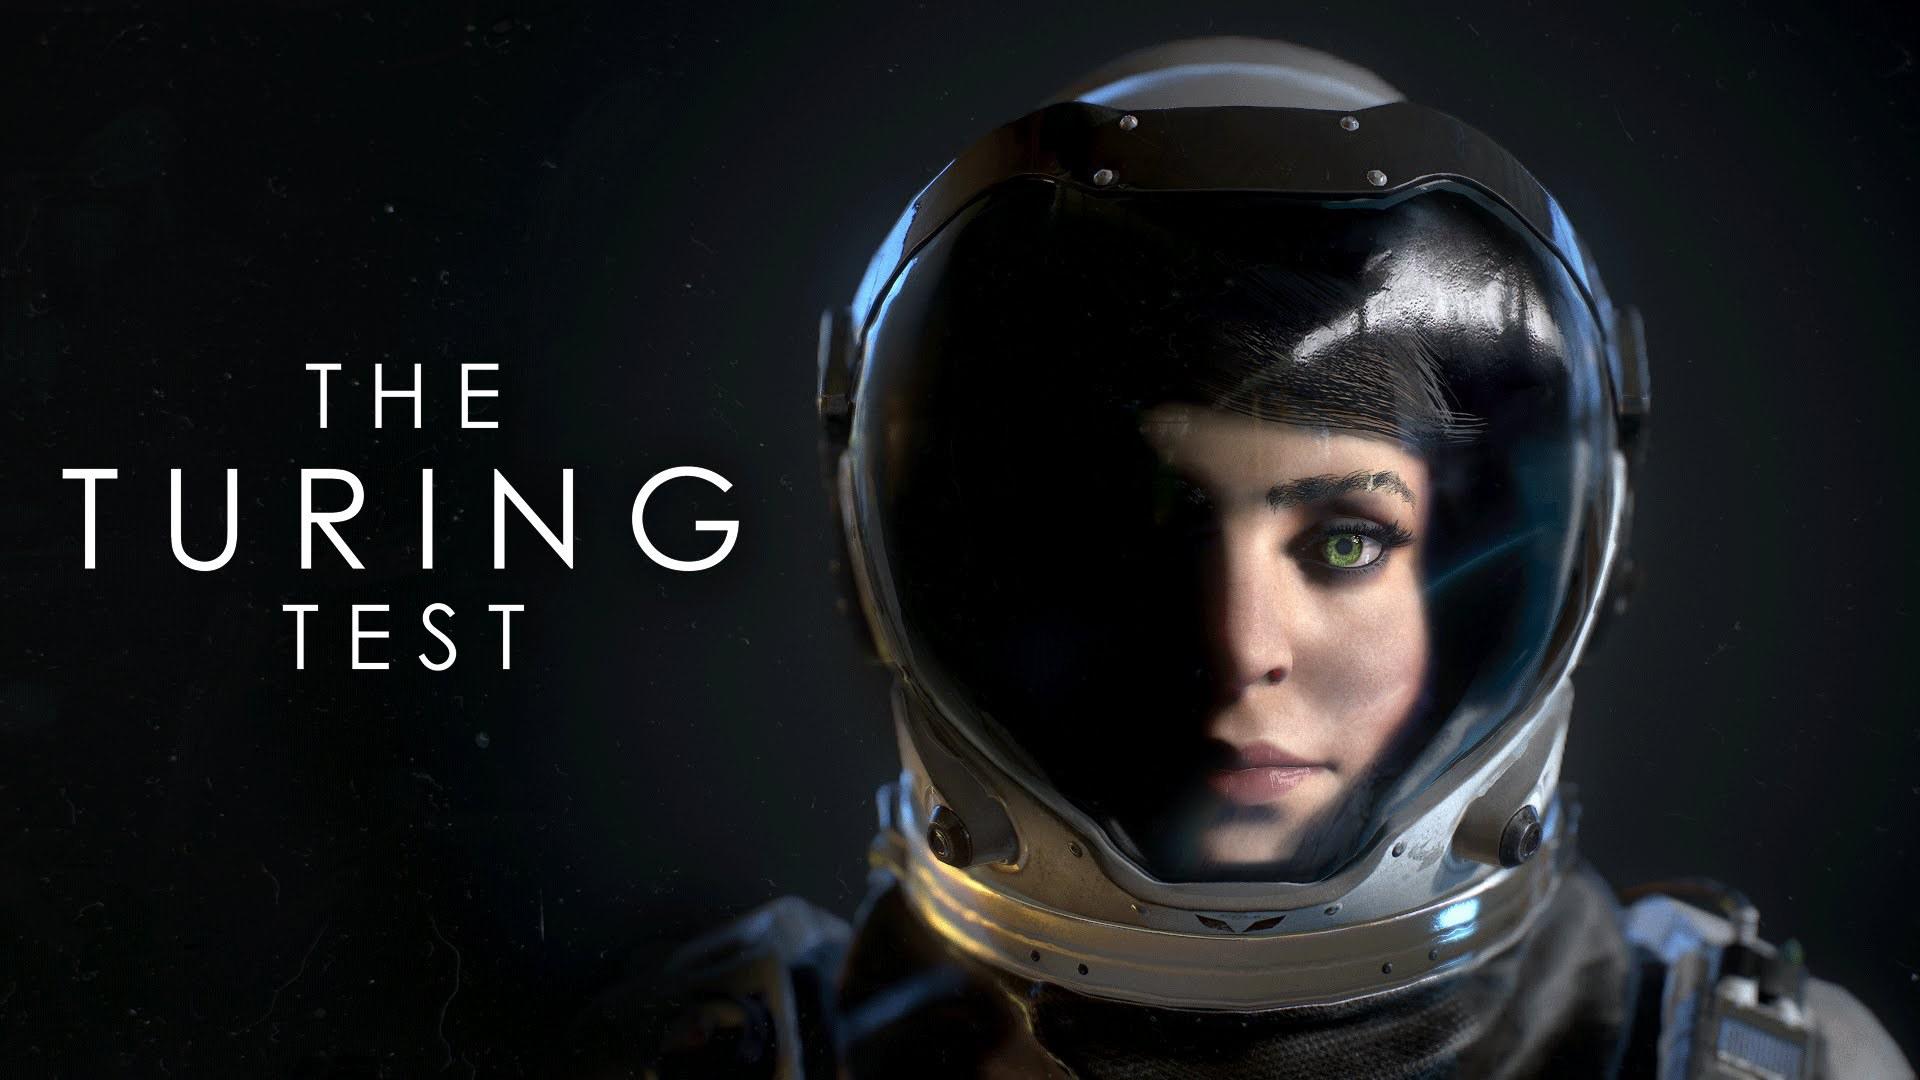 The Turing Test Wallpaper Image Photo Picture Background